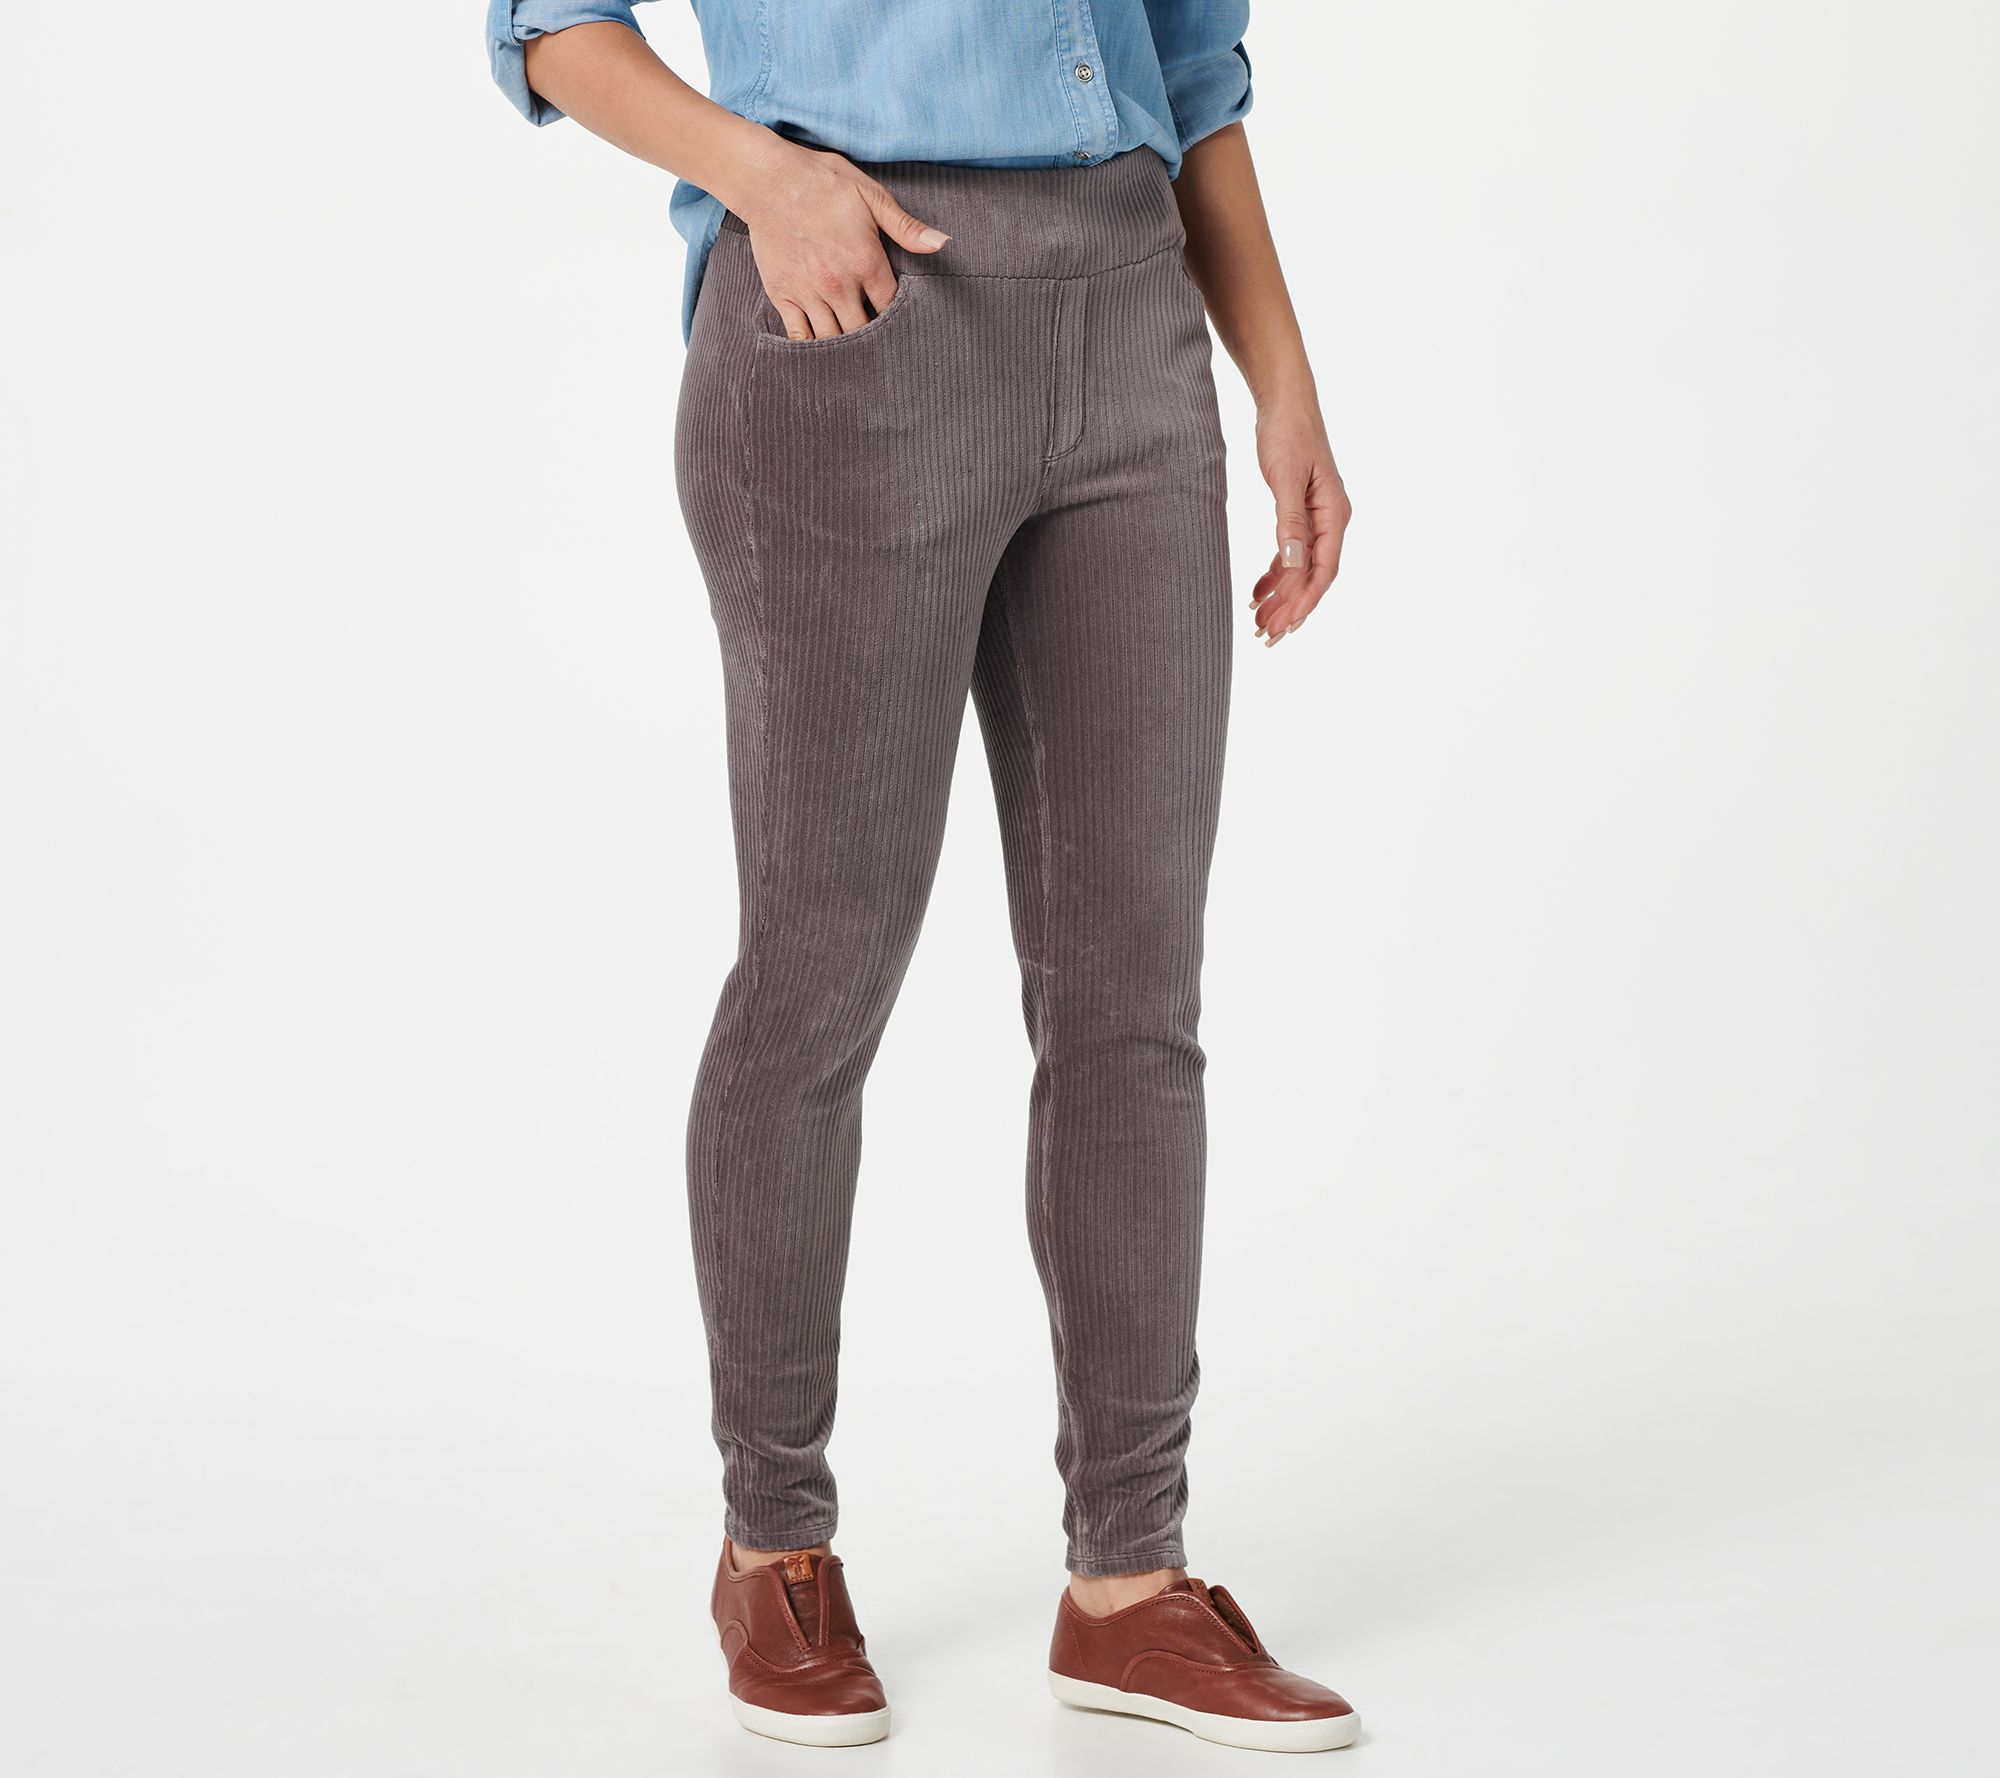 Denim & Co. Petite Smooth Waist Knit Cord Leggings with Pockets 